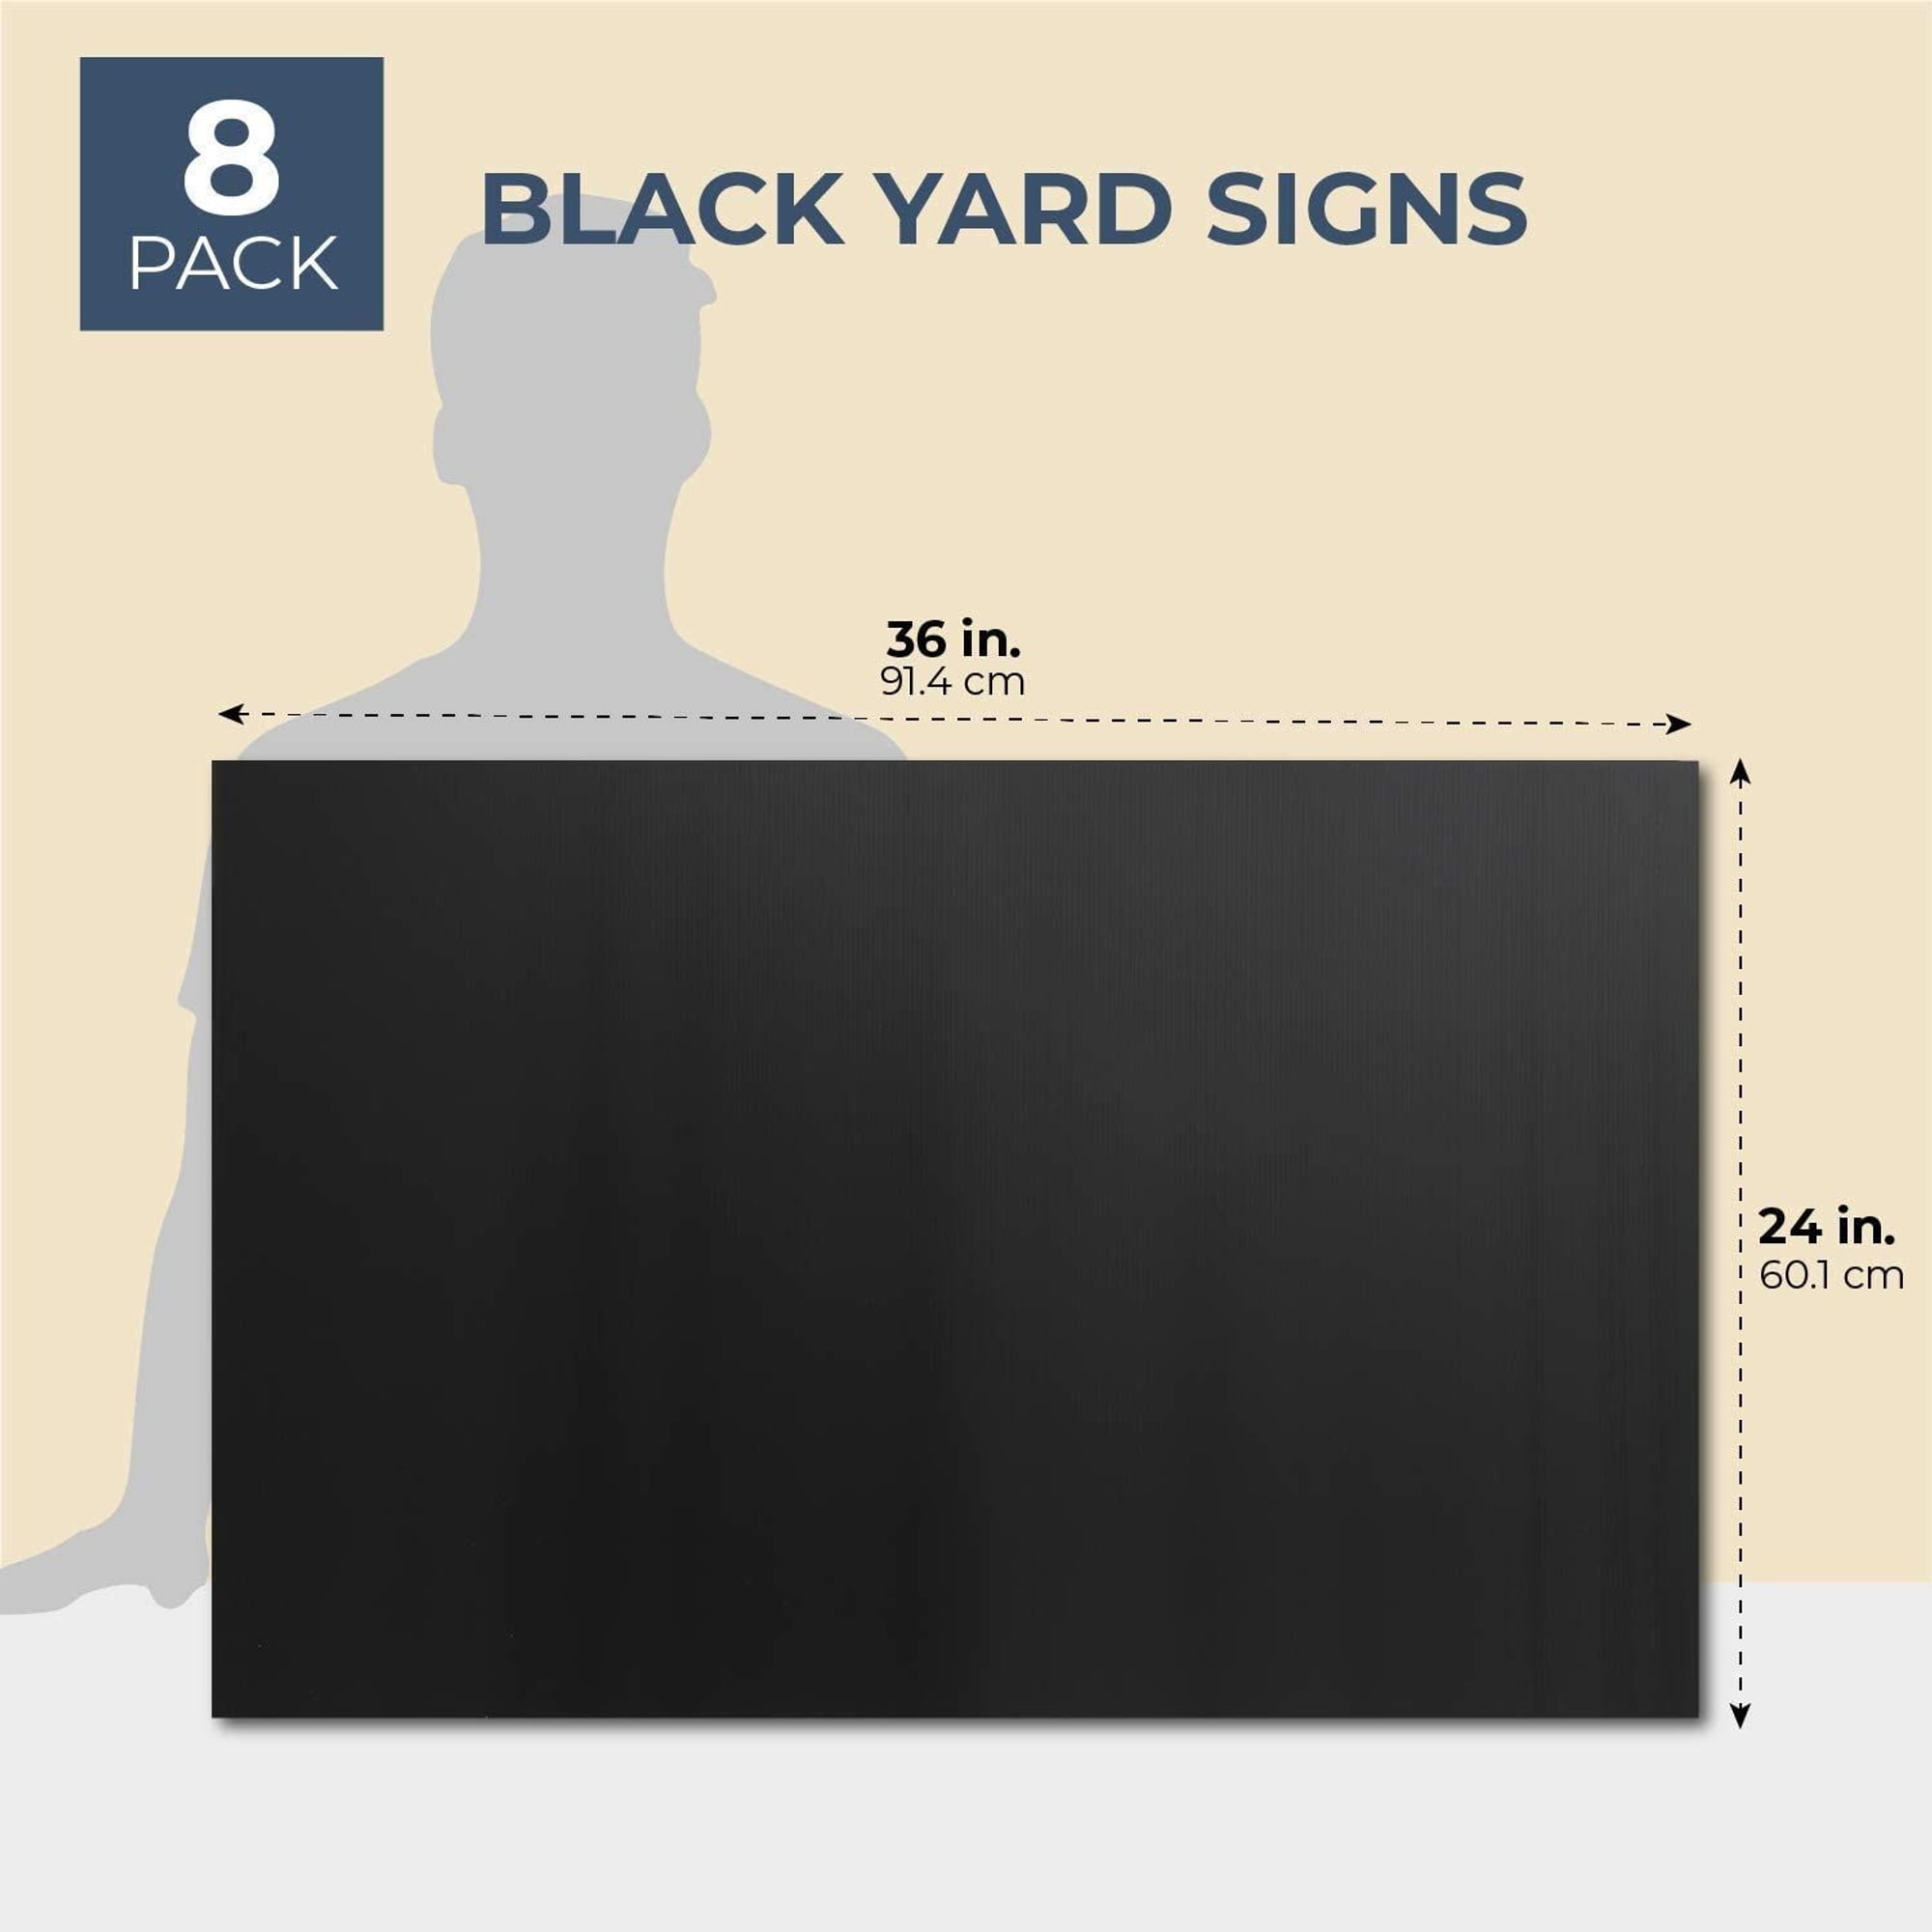 8-Pack Corrugated Plastic Yard Signs, 24x36 Poster Board, 4mm